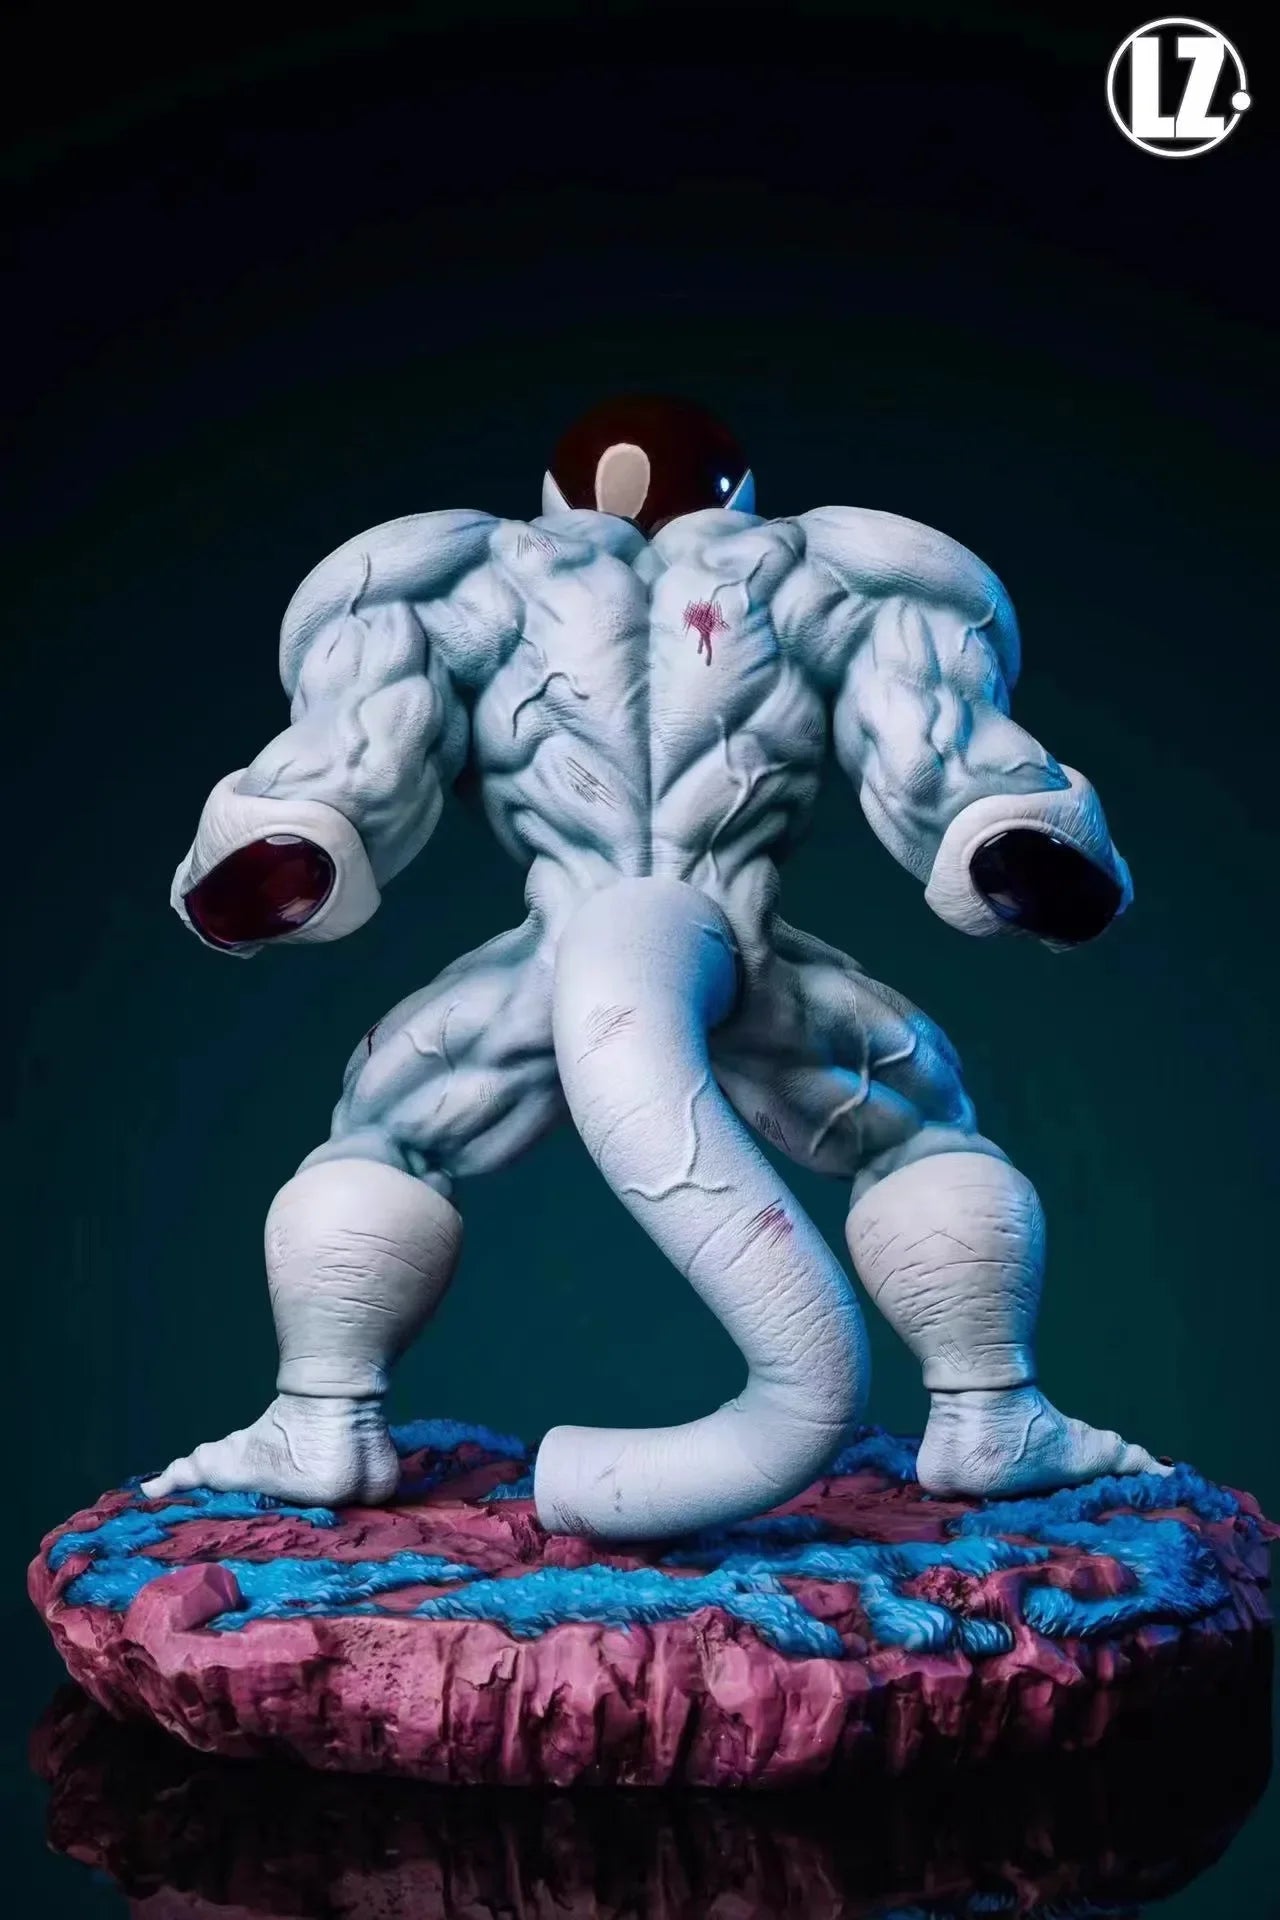 Dragon Ball Z Figures Frieza Anime Figure Full Power Freezer Action Figures Pvc Model Gk Doll Collection Statue Model Toy Gifts